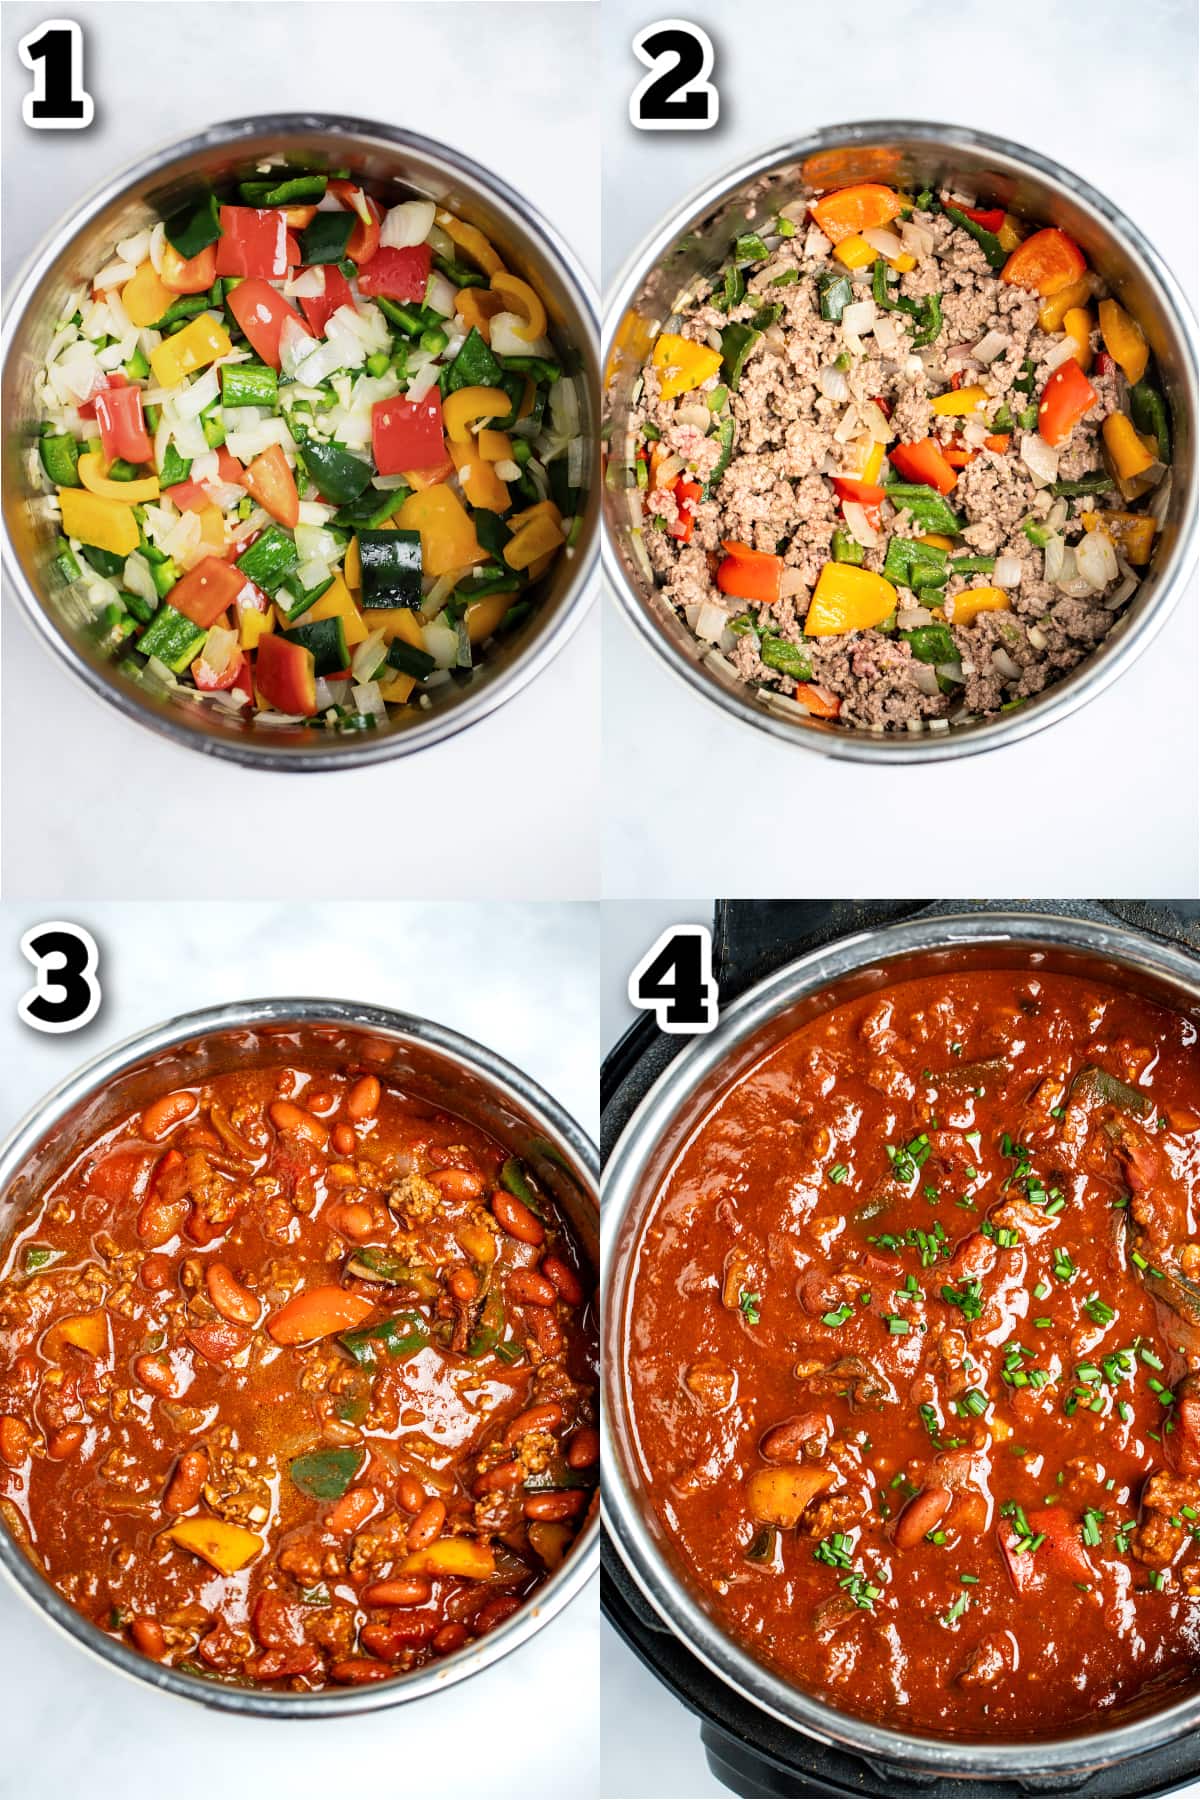 Step by step photos for how to make instant pot chili.